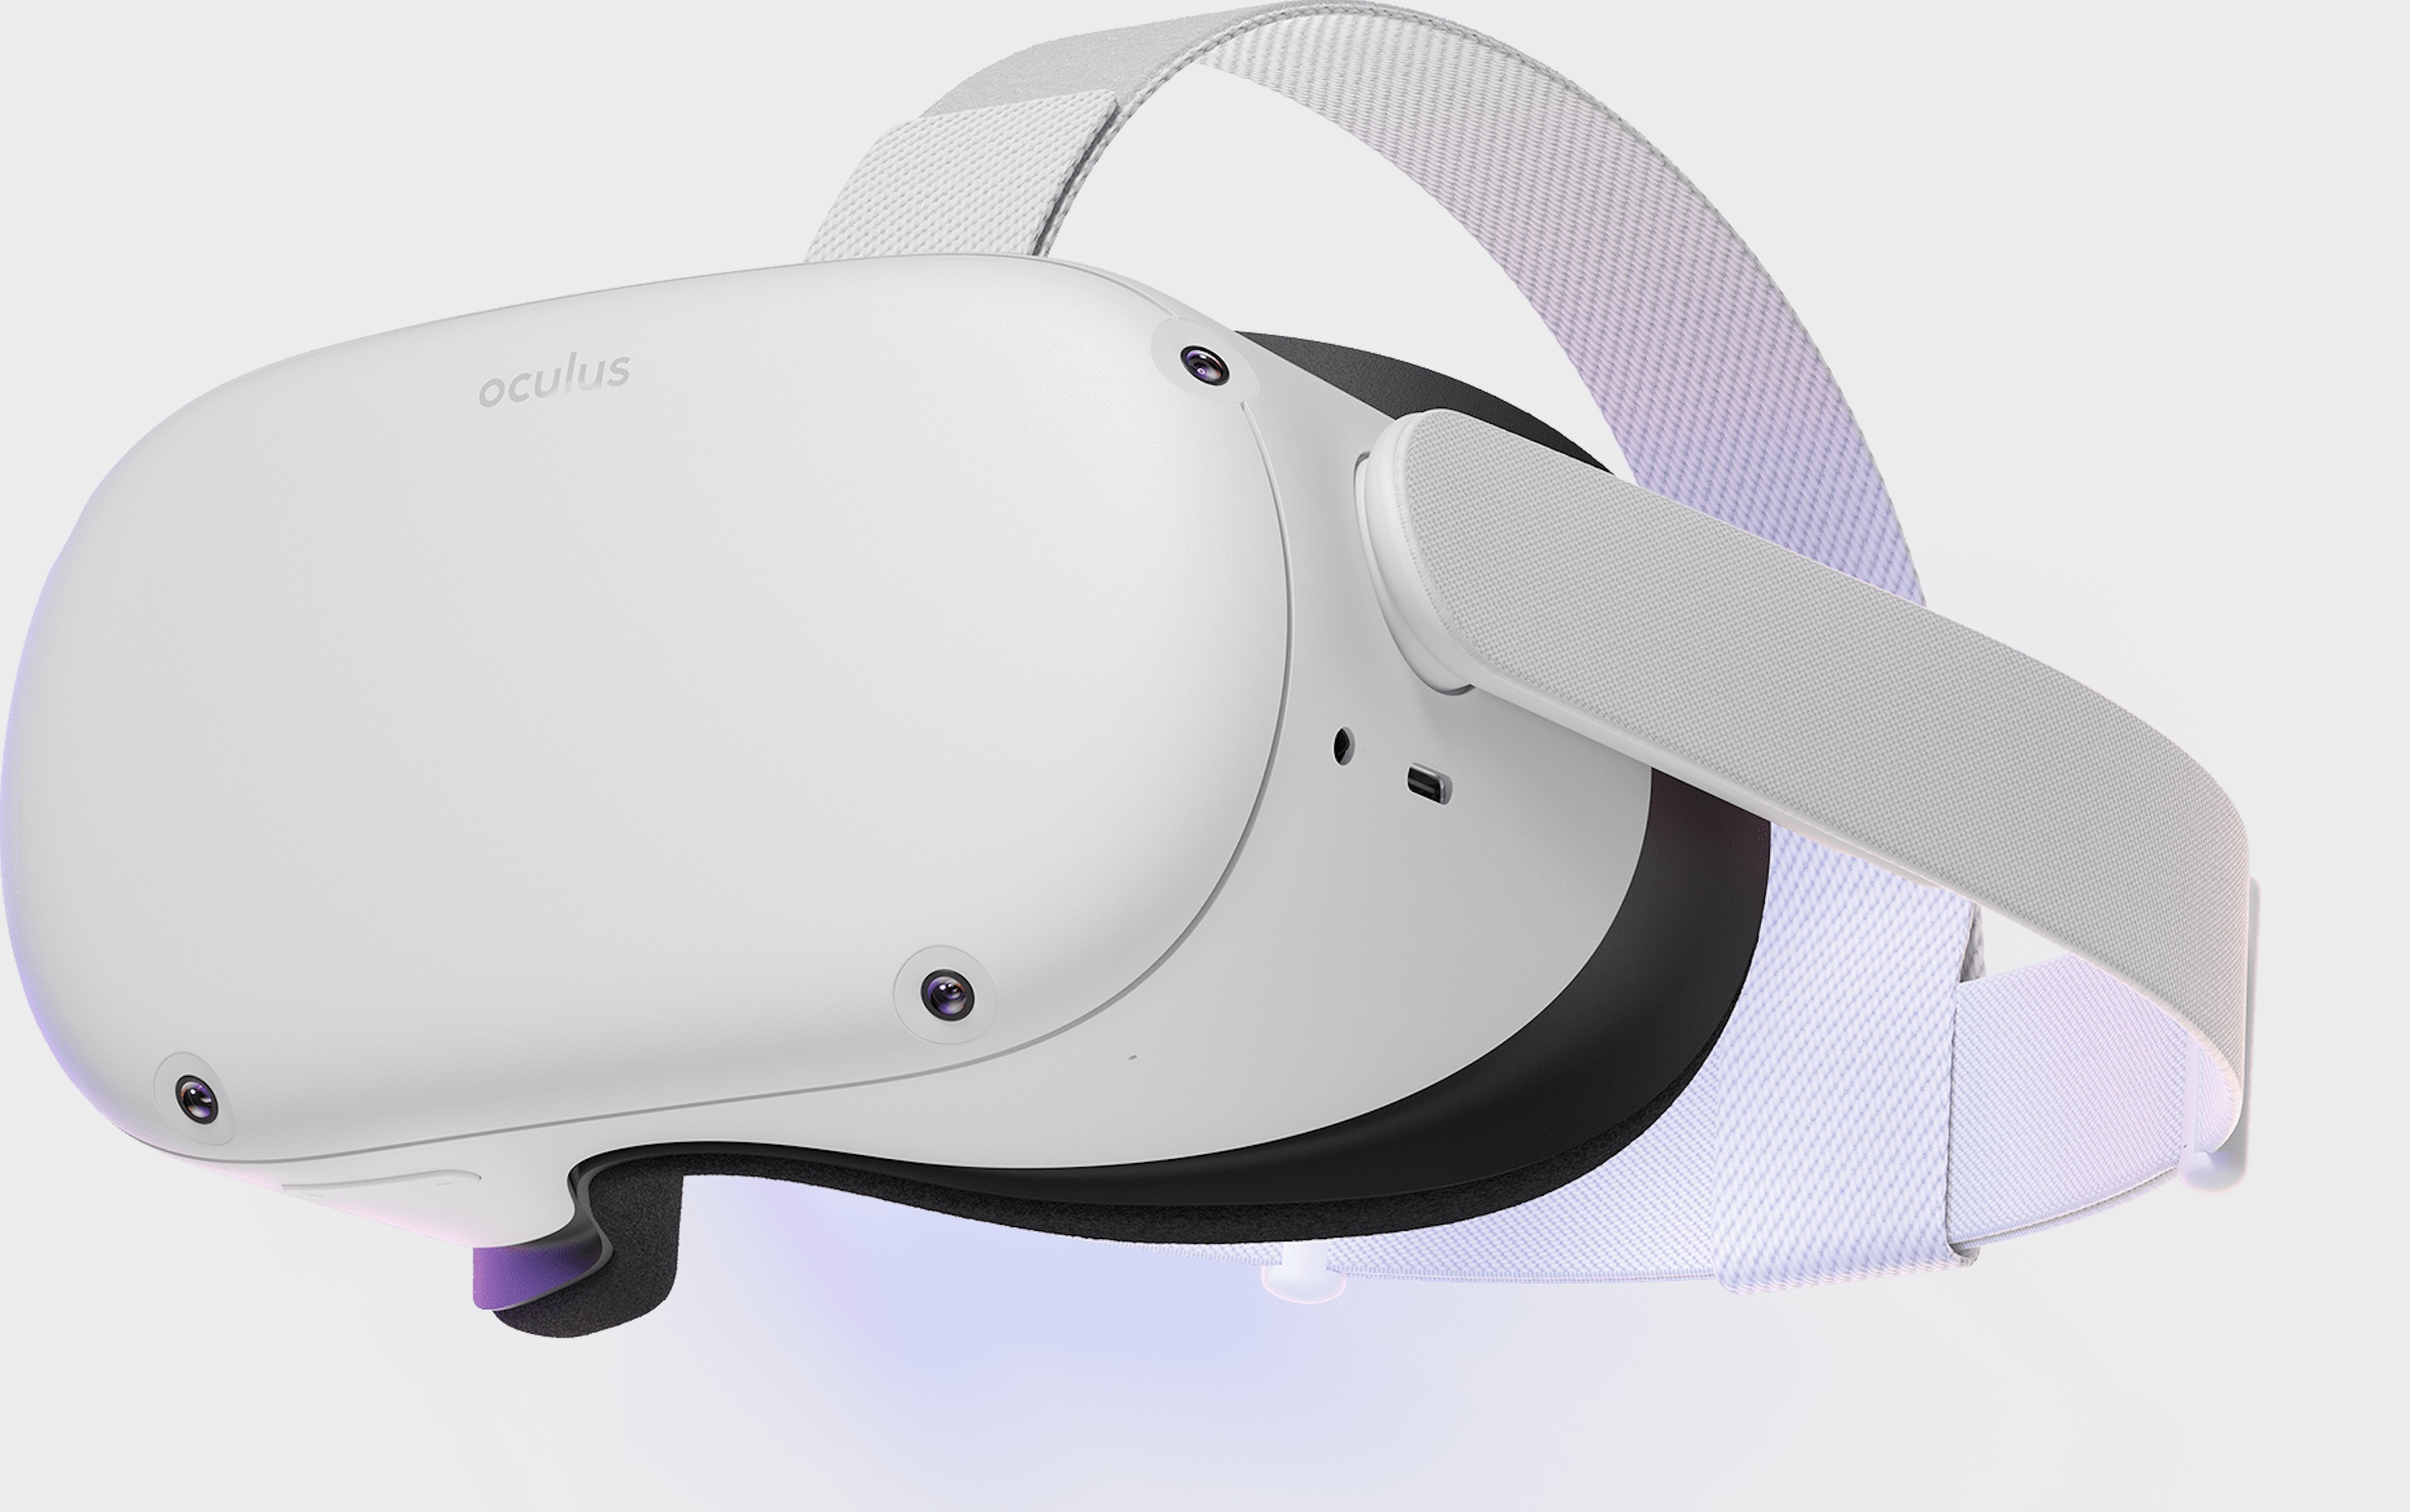 How to pre-order the Oculus Quest 2